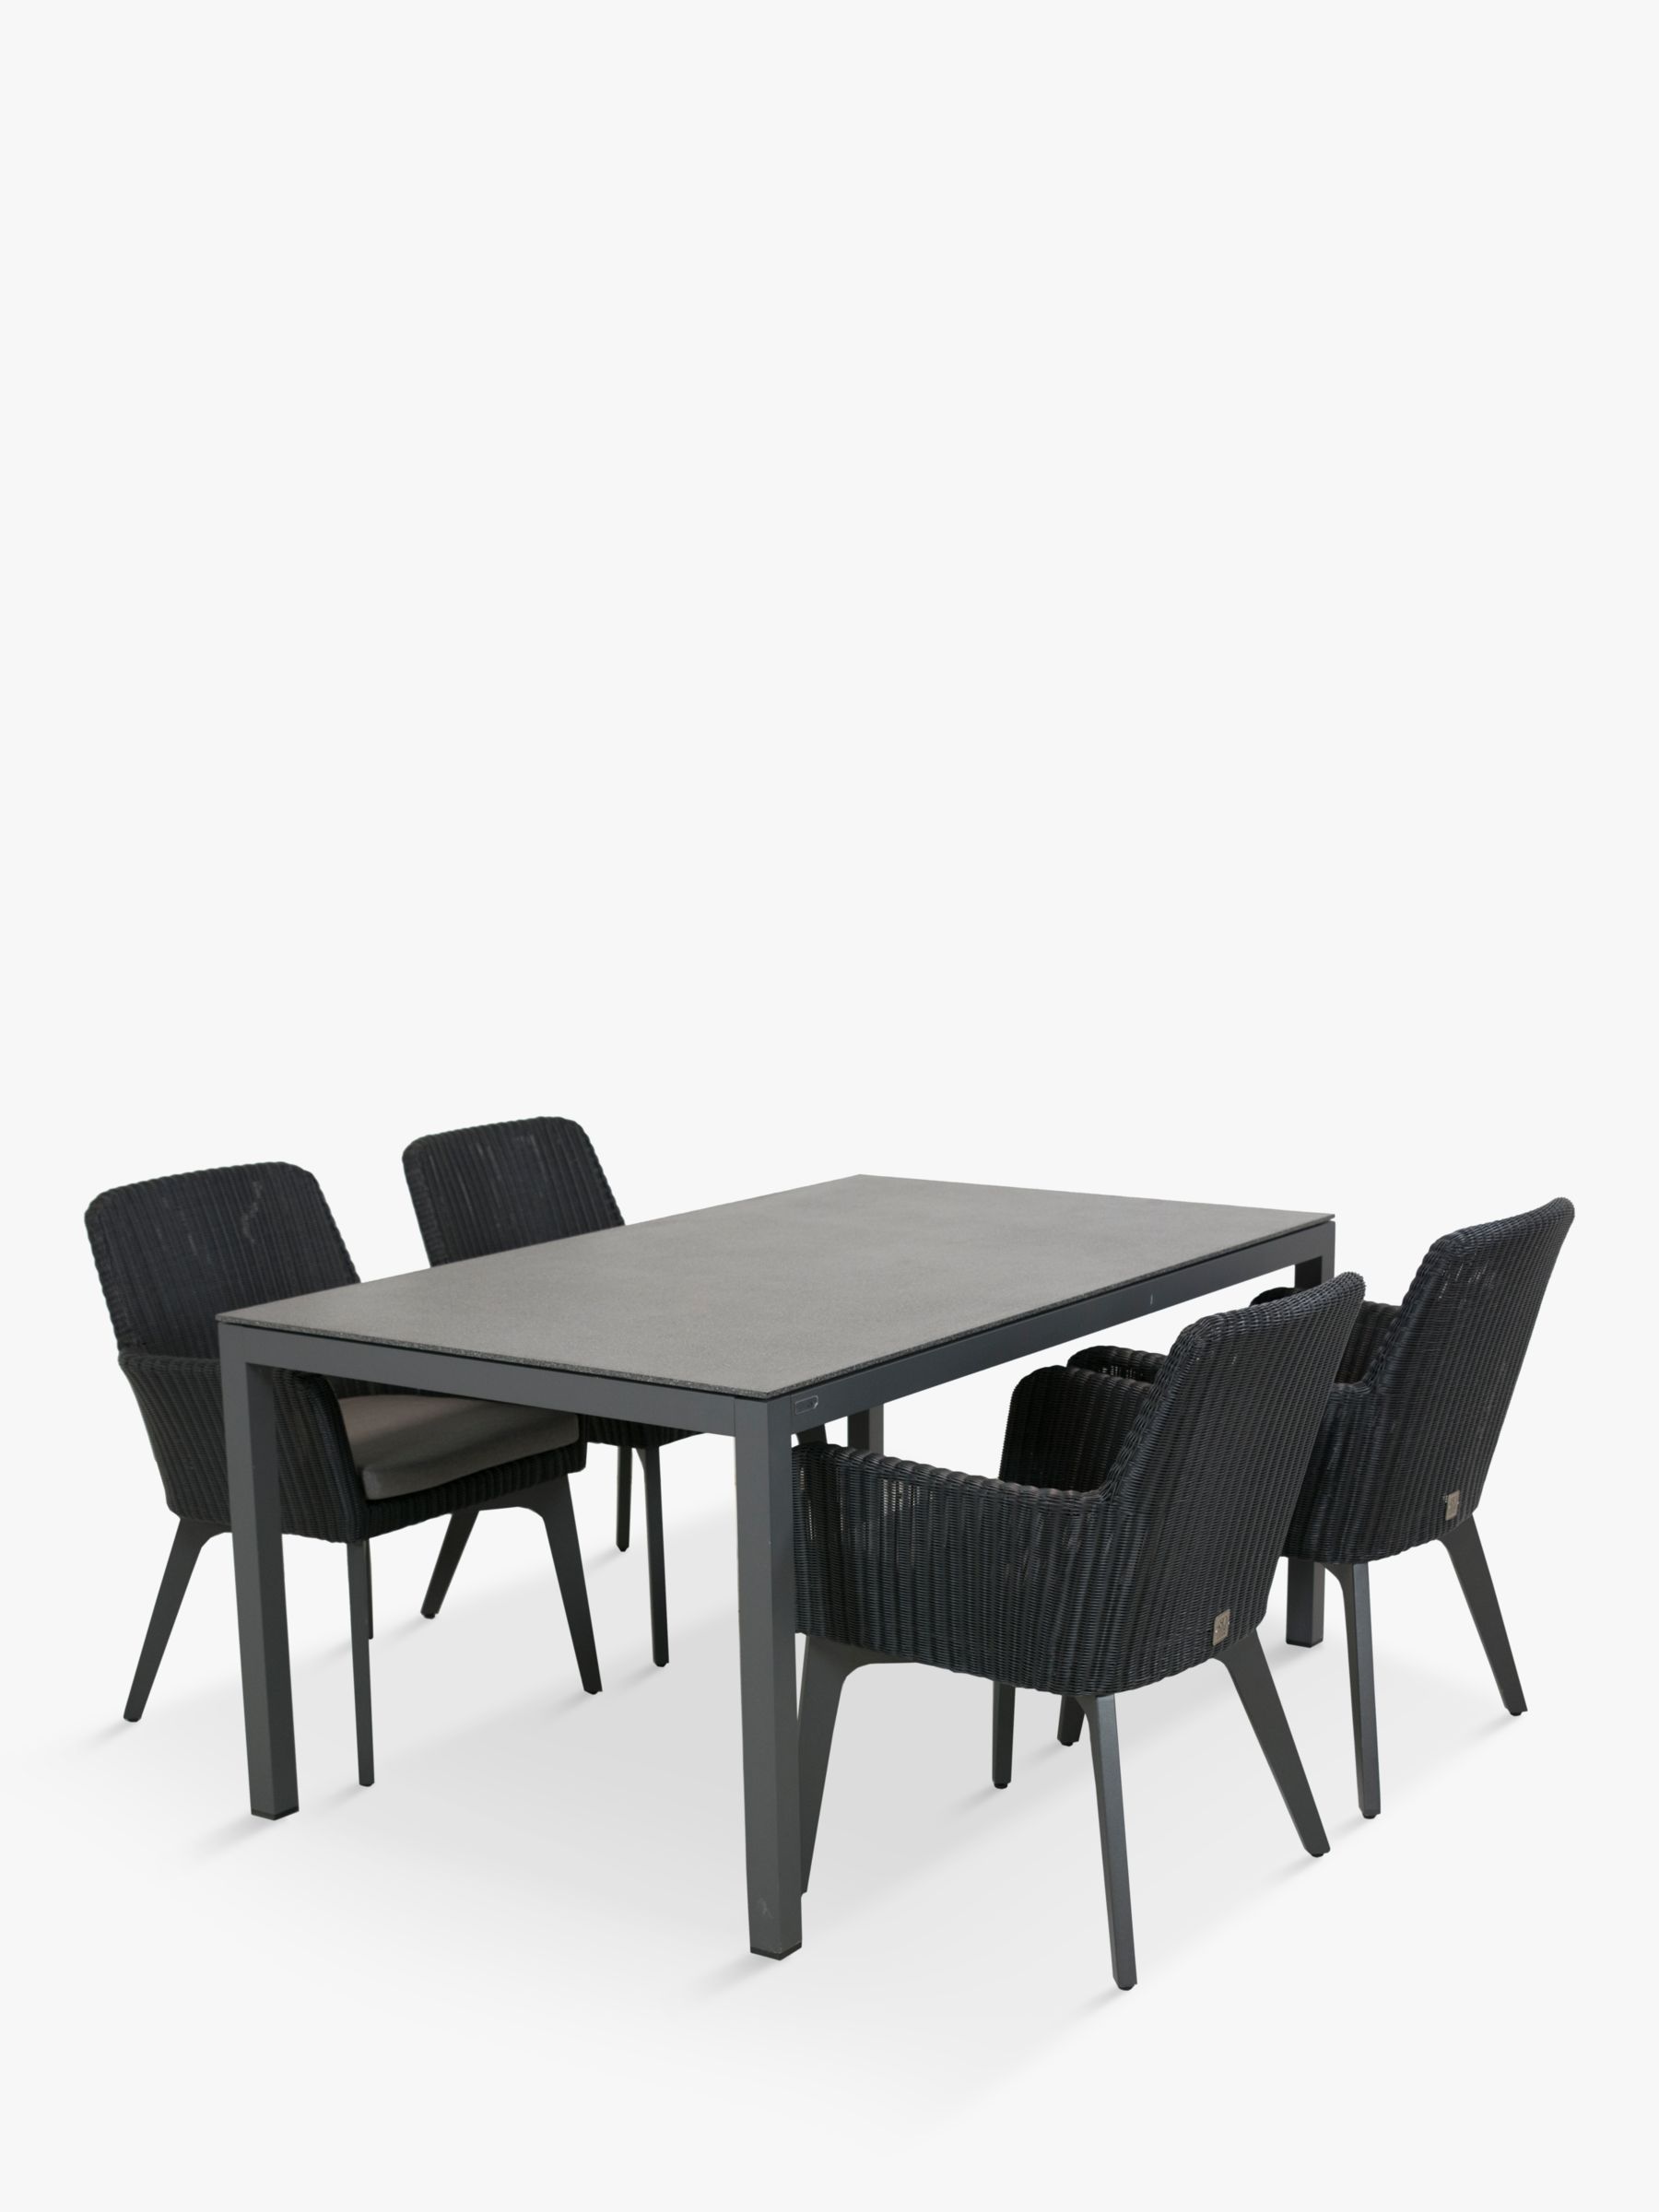 Photo of 4 seasons outdoor lisboa 4-seater garden table & chairs set polyloom anthracite